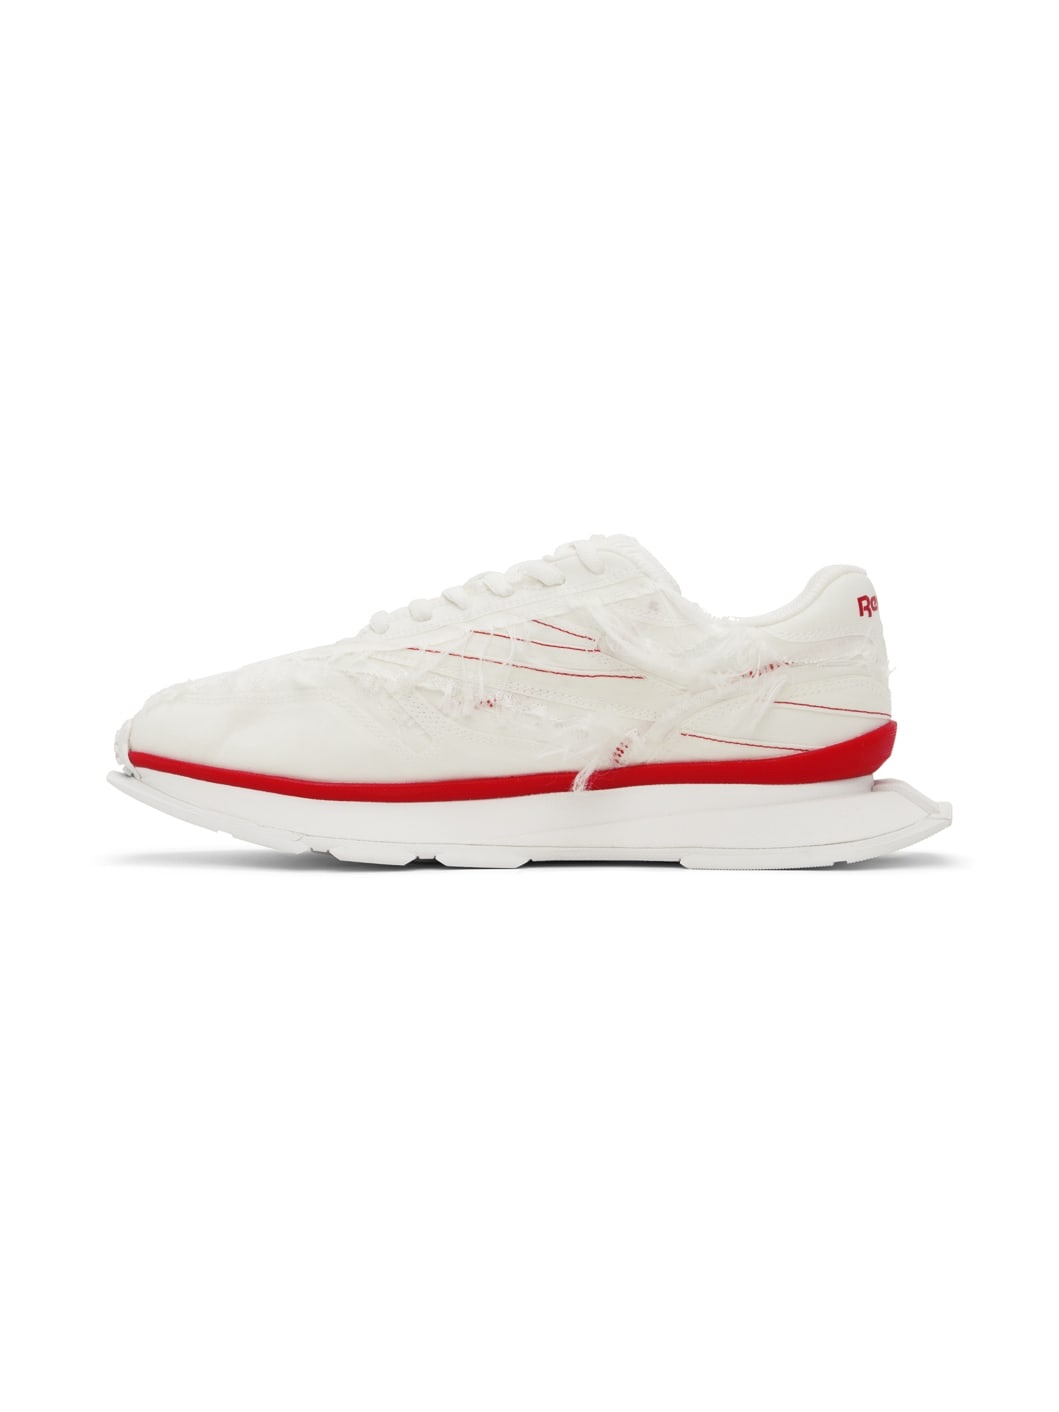 White Reebok Edition Classic Leather LTD Sneakers - 3